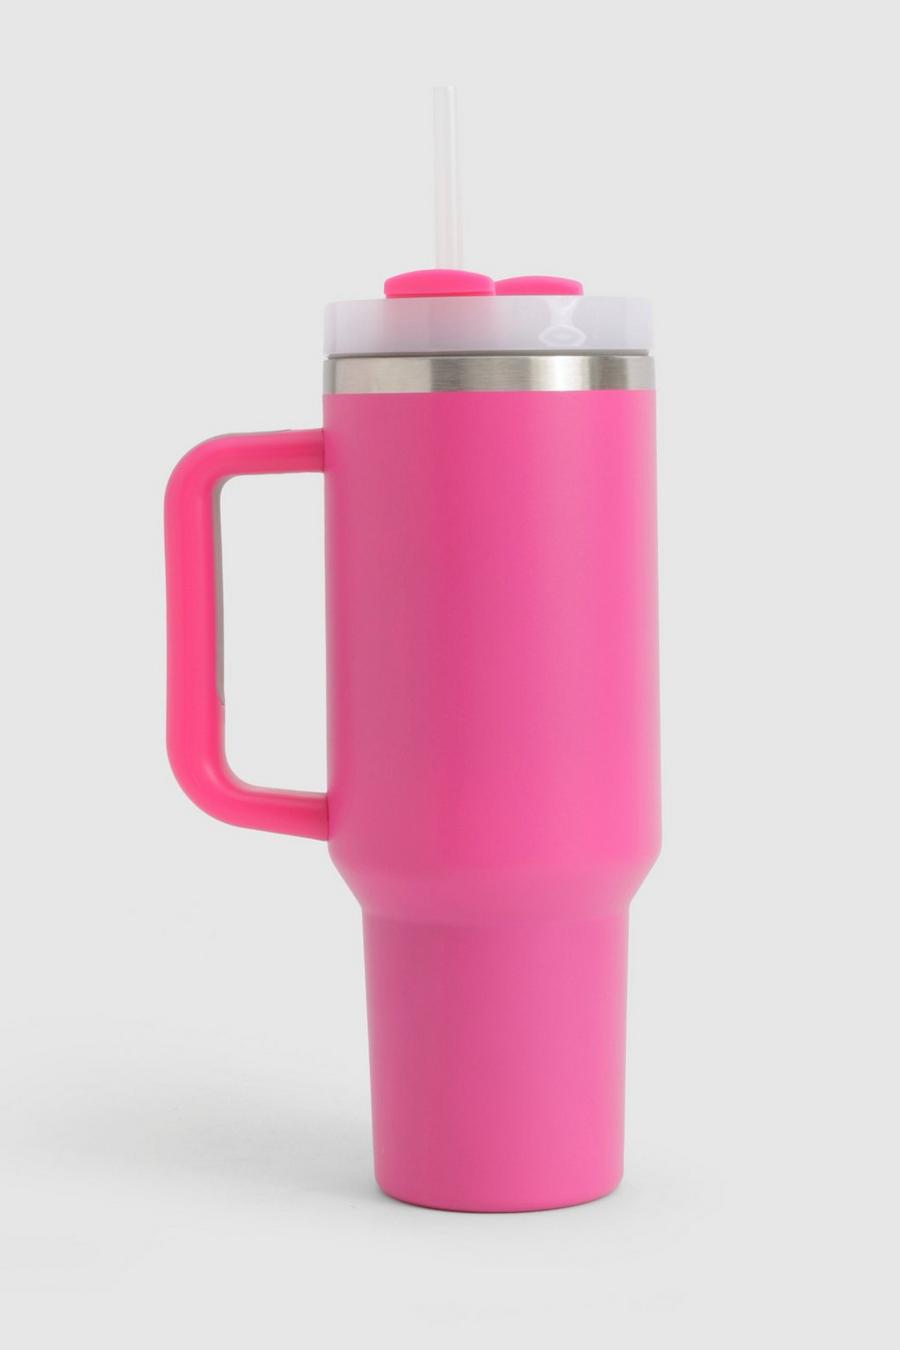 Bright pink Stainless Steel Large Travel Cup